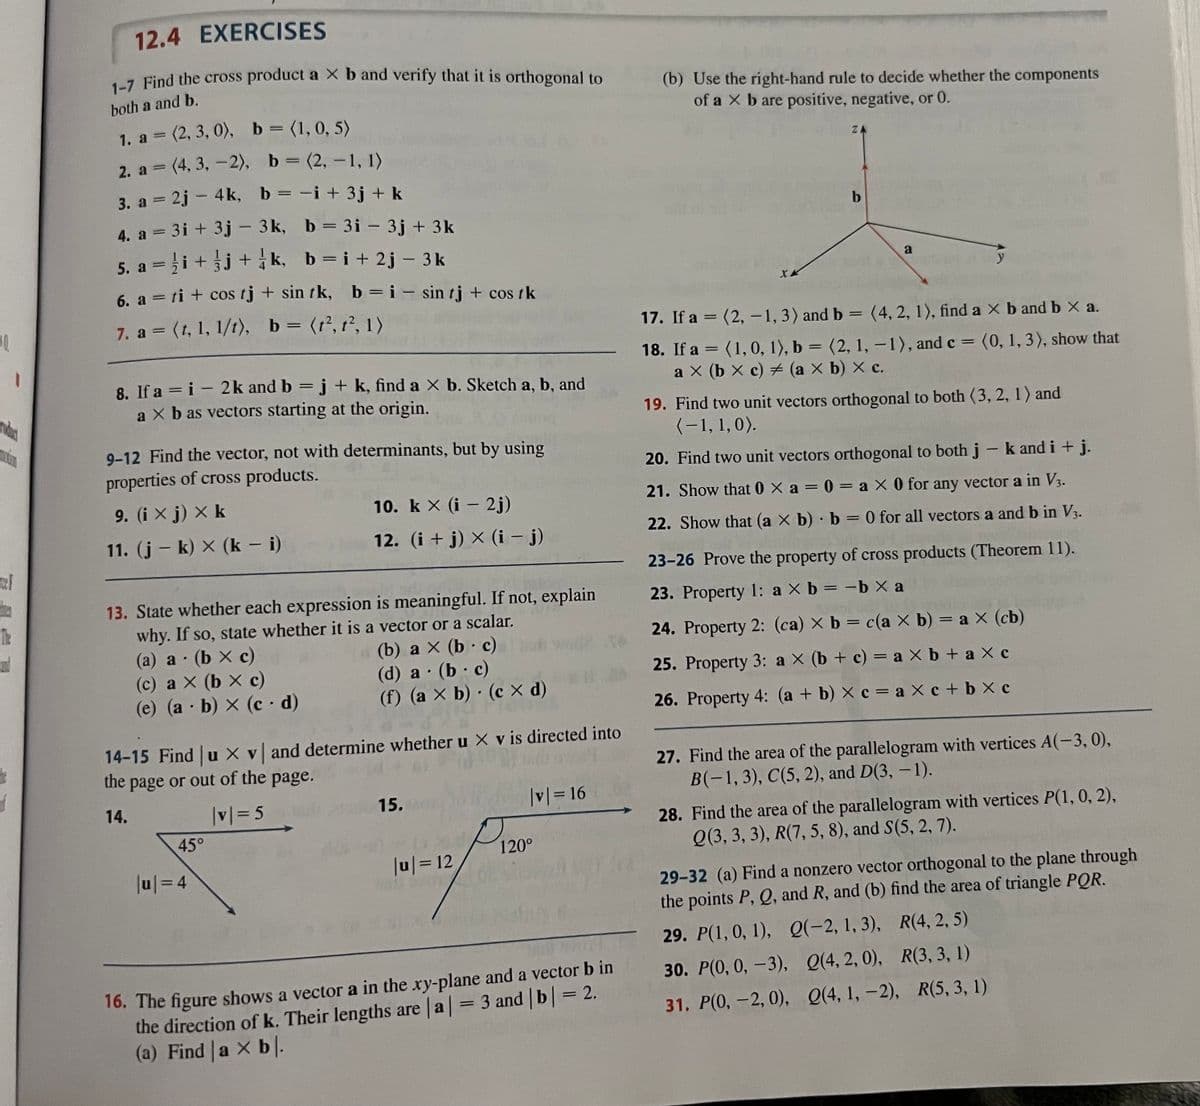 10.
The
1
12.4 EXERCISES
1-7 Find the cross product a X b and verify that it is orthogonal to
both a and b.
= (2, 3, 0), b = (1, 0, 5)
(2, 3,
0),
1. a =
2. a = (4, 3, -2), b = (2, -1, 1)
3. a = 2j- 4k, b = -i + 3j + k
4. a = 3i+3j - 3k,
b=3i - 3j + 3k
5. a =i+j+k,
b=i+2j-3k
6. a = ti + cos tj + sin tk, b = i sin tj + cos / k
7. a = (1, 1, 1/1), b = (t², t², 1)
8. If a=i- 2k and b = j + k, find a X b. Sketch a, b, and
a X b as vectors starting at the origin.
9-12 Find the vector, not with determinants, but by using
properties of cross products.
9. (ix j) × k
11. (j-k) x (k - i)
(a) a (b x c)
•
13. State whether each expression is meaningful. If not, explain
why. If so, state whether it is a vector or a scalar.
(c) ax (bx c)
(e) (a - b) x (cd)
10. kx (i 2j)
12. (i + j) × (i − j)
45°
|u| = 4
-
(b) a x (b. c)
(d) a (b c)
(f) (axb) (cx d)
14-15 Find |ux v and determine whether u X v is directed into
the page or out of the page.
14.
|v|=5
15.
|u|=12
●
|v|= 16
120°
16. The figure shows a vector a in the xy-plane and a vector b in
the direction of k. Their lengths are |a| = 3 and | b | = 2.
(a) Find a × b.
(b) Use the right-hand rule to decide whether the components
of a X b are positive, negative, or 0.
17. If a =
18. If a
XX
=
ZA
b
a
(1, 0, 1), b = (2, 1, -1), and c = (0, 1, 3), show that
ax (bx c) = (a X b) X c.
(2, -1, 3) and b = (4, 2, 1), find a × b and b X a.
y
19. Find two unit vectors orthogonal to both (3, 2, 1) and
(-1, 1, 0).
20. Find two unit vectors orthogonal to both j - k and i + j.
21. Show that 0 Xa=0= ax 0 for any vector a in V3.
22. Show that (a X b) b = 0 for all vectors a and b in V3.
23-26 Prove the property of cross products (Theorem 11).
23. Property 1: a × b = -b xa
24. Property 2: (ca) X b = c(a X b) = a × (cb)
25. Property 3: a X (b + c) = a × b + ax c
26. Property 4: (a + b) × c = ax c + bxc
27. Find the area of the parallelogram with vertices A(-3,0),
B(-1,3), C(5, 2), and D(3, -1).
28. Find the area of the parallelogram with vertices P(1, 0, 2),
Q(3, 3, 3), R(7, 5, 8), and S(5, 2, 7).
Q(4, 1, -2),
29-32 (a) Find a nonzero vector orthogonal to the plane through
the points P, Q, and R, and (b) find the area of triangle PQR.
29. P(1, 0, 1),
30. P(0, 0, -3),
31. P(0, -2, 0),
Q(-2, 1, 3),
Q(4, 2, 0),
R(4, 2, 5)
R(3, 3, 1)
R(5, 3, 1)